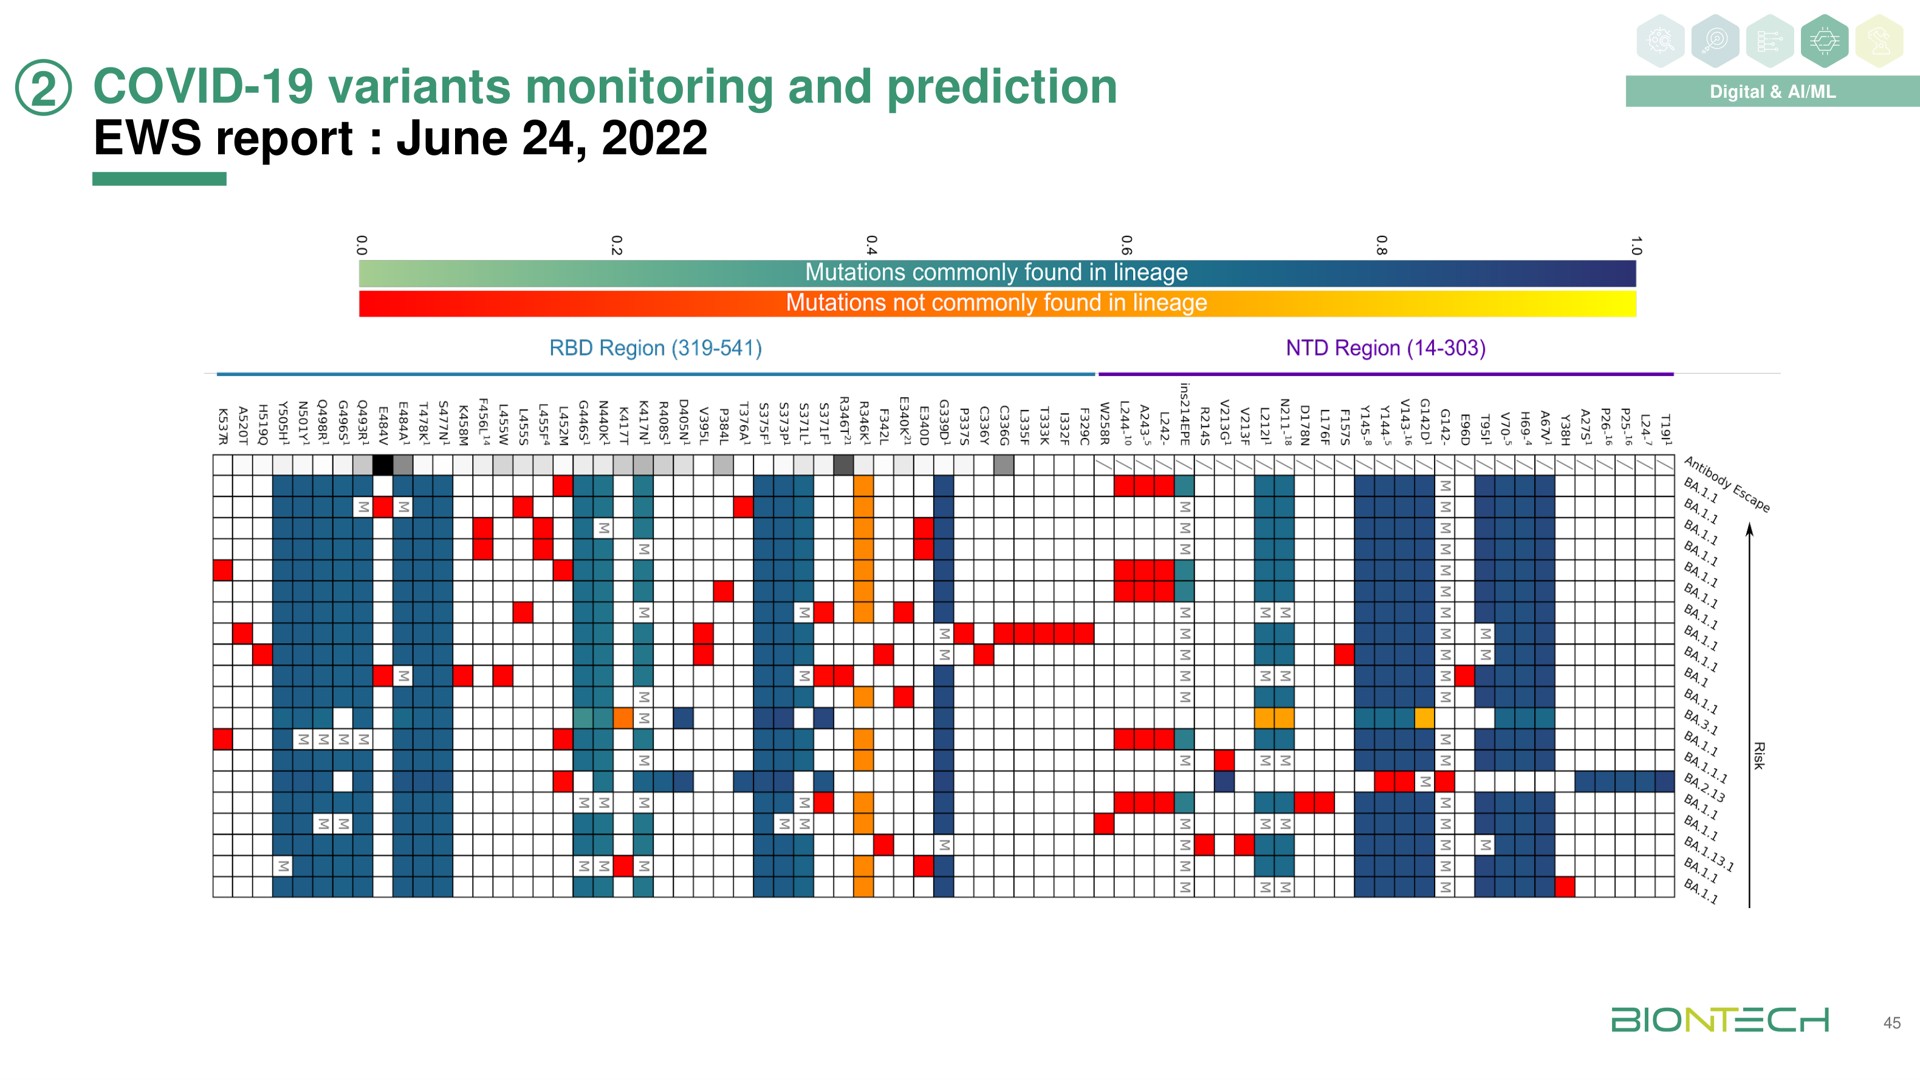 covid variants monitoring and prediction report june | BioNTech